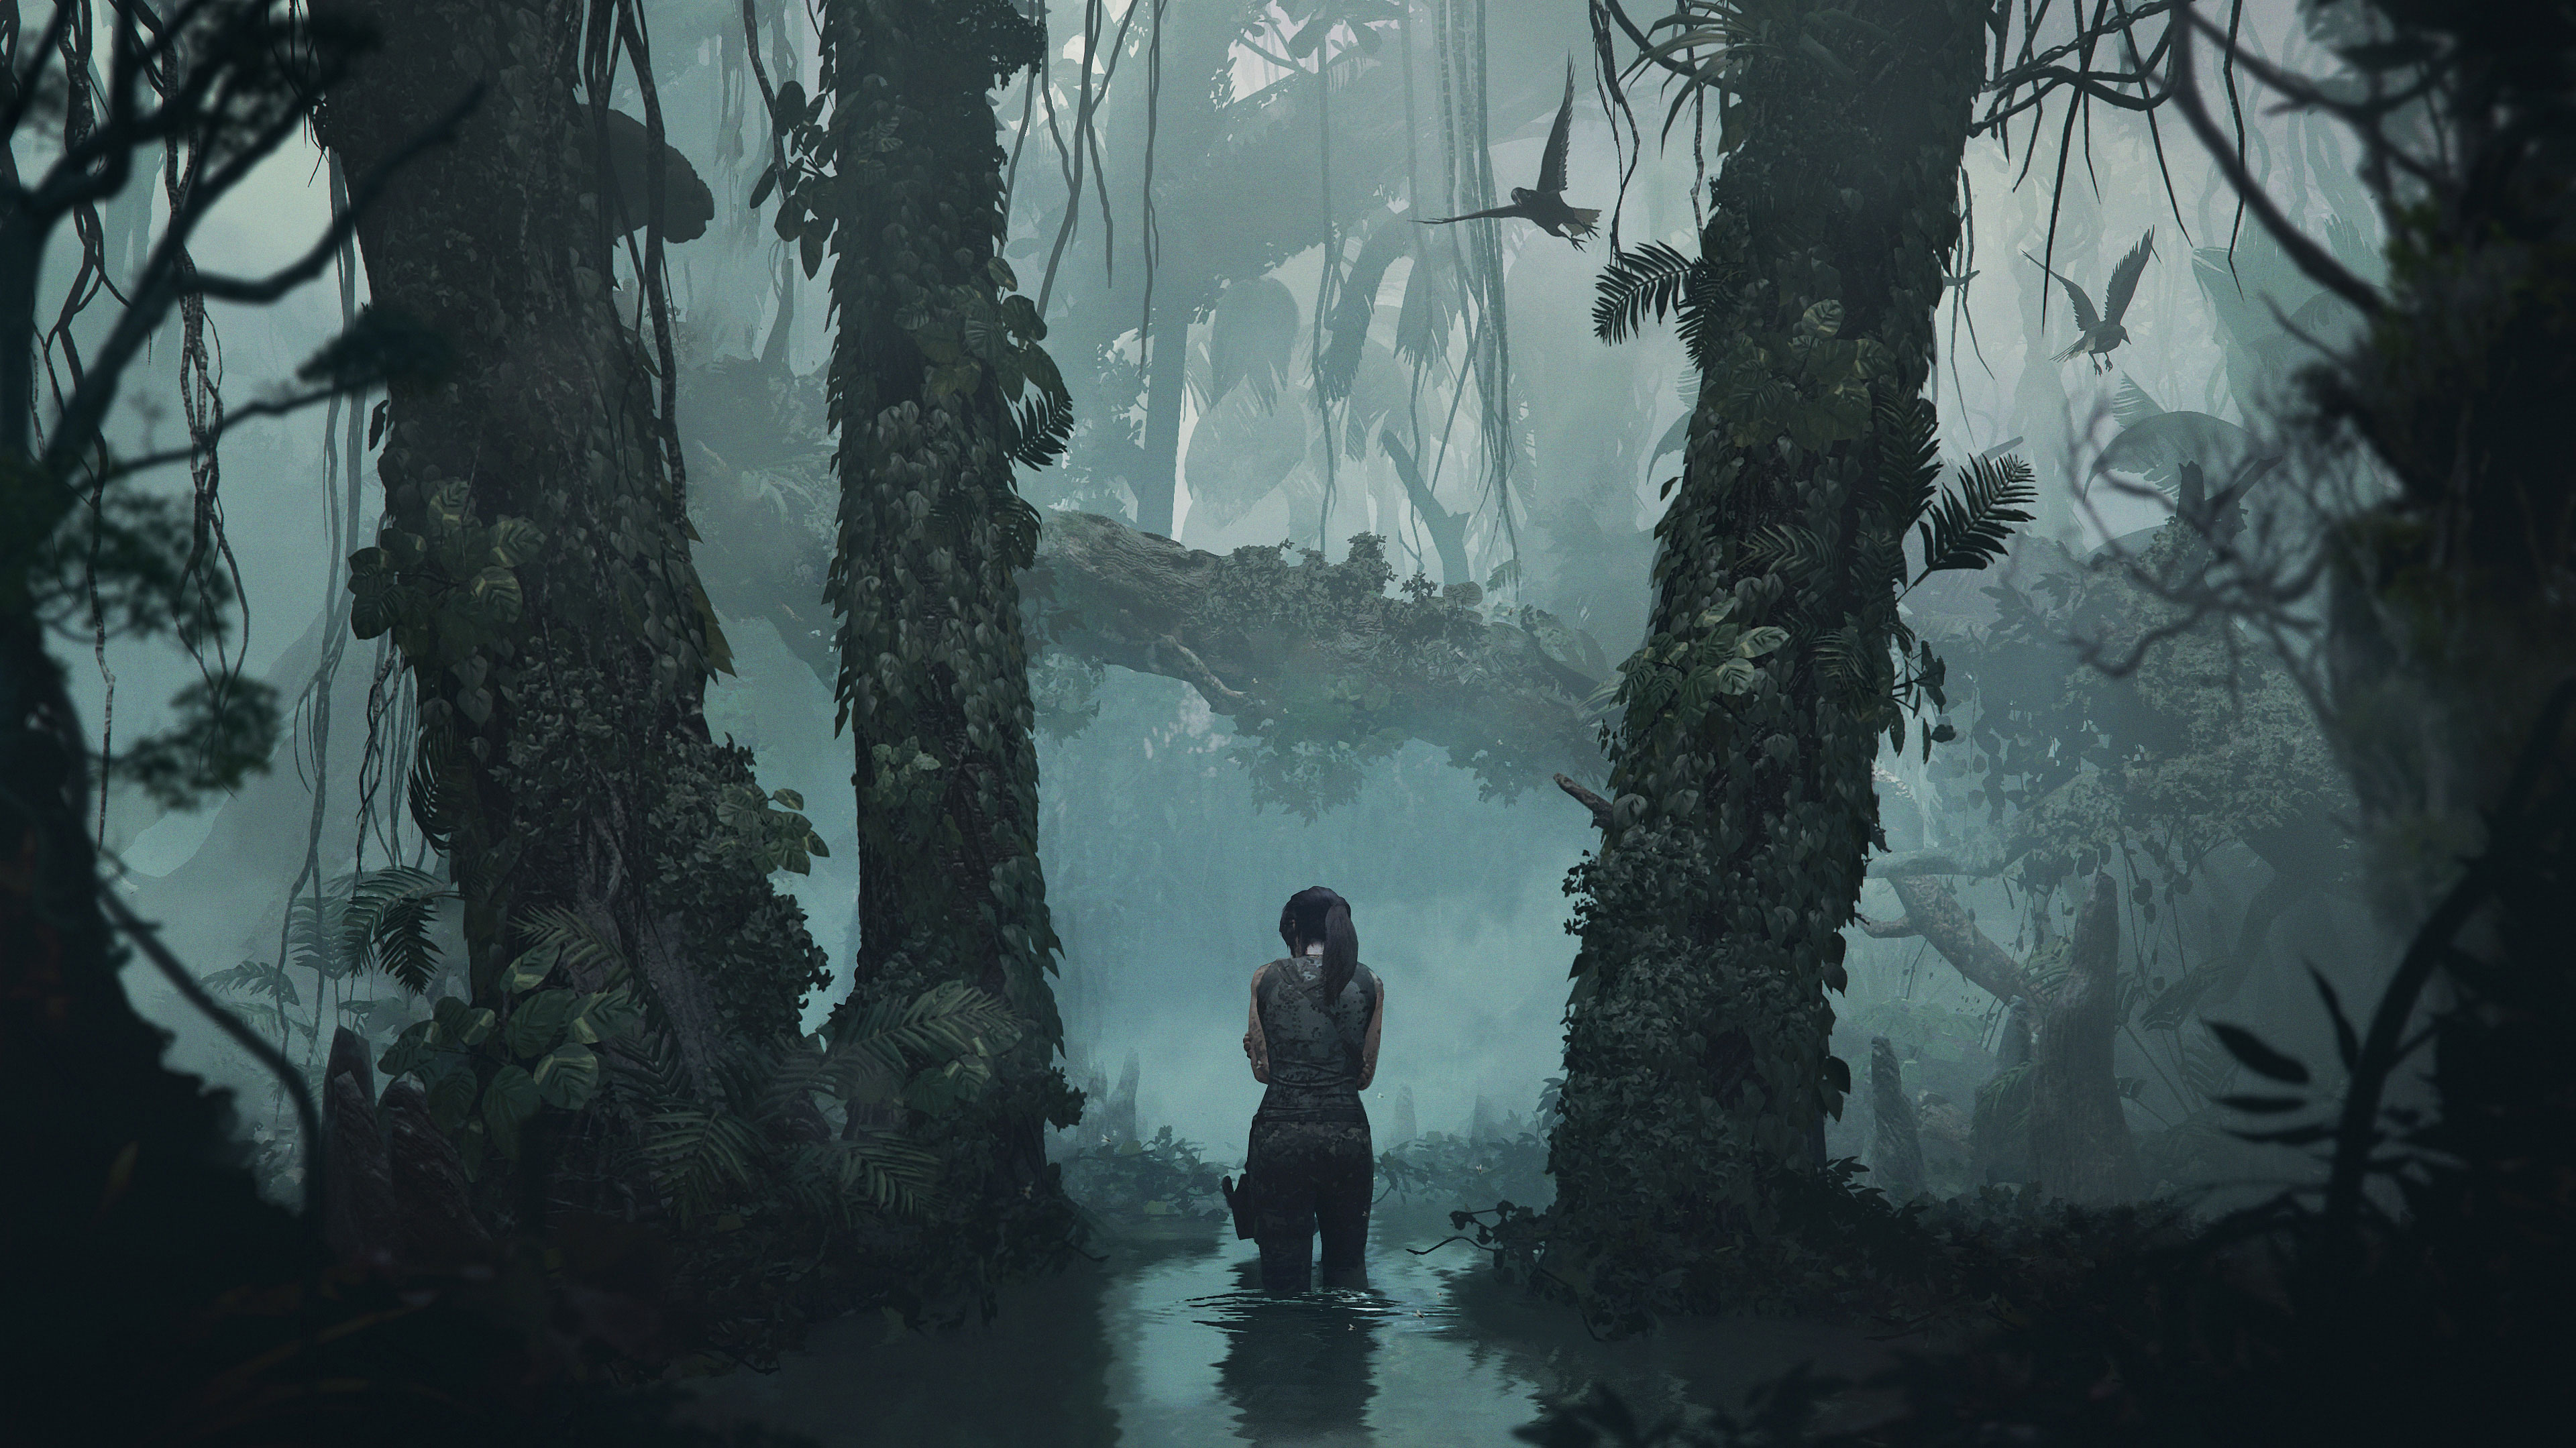 Shadow of the Tomb Raider Wallpapers in Ultra HD 4K   Gameranx